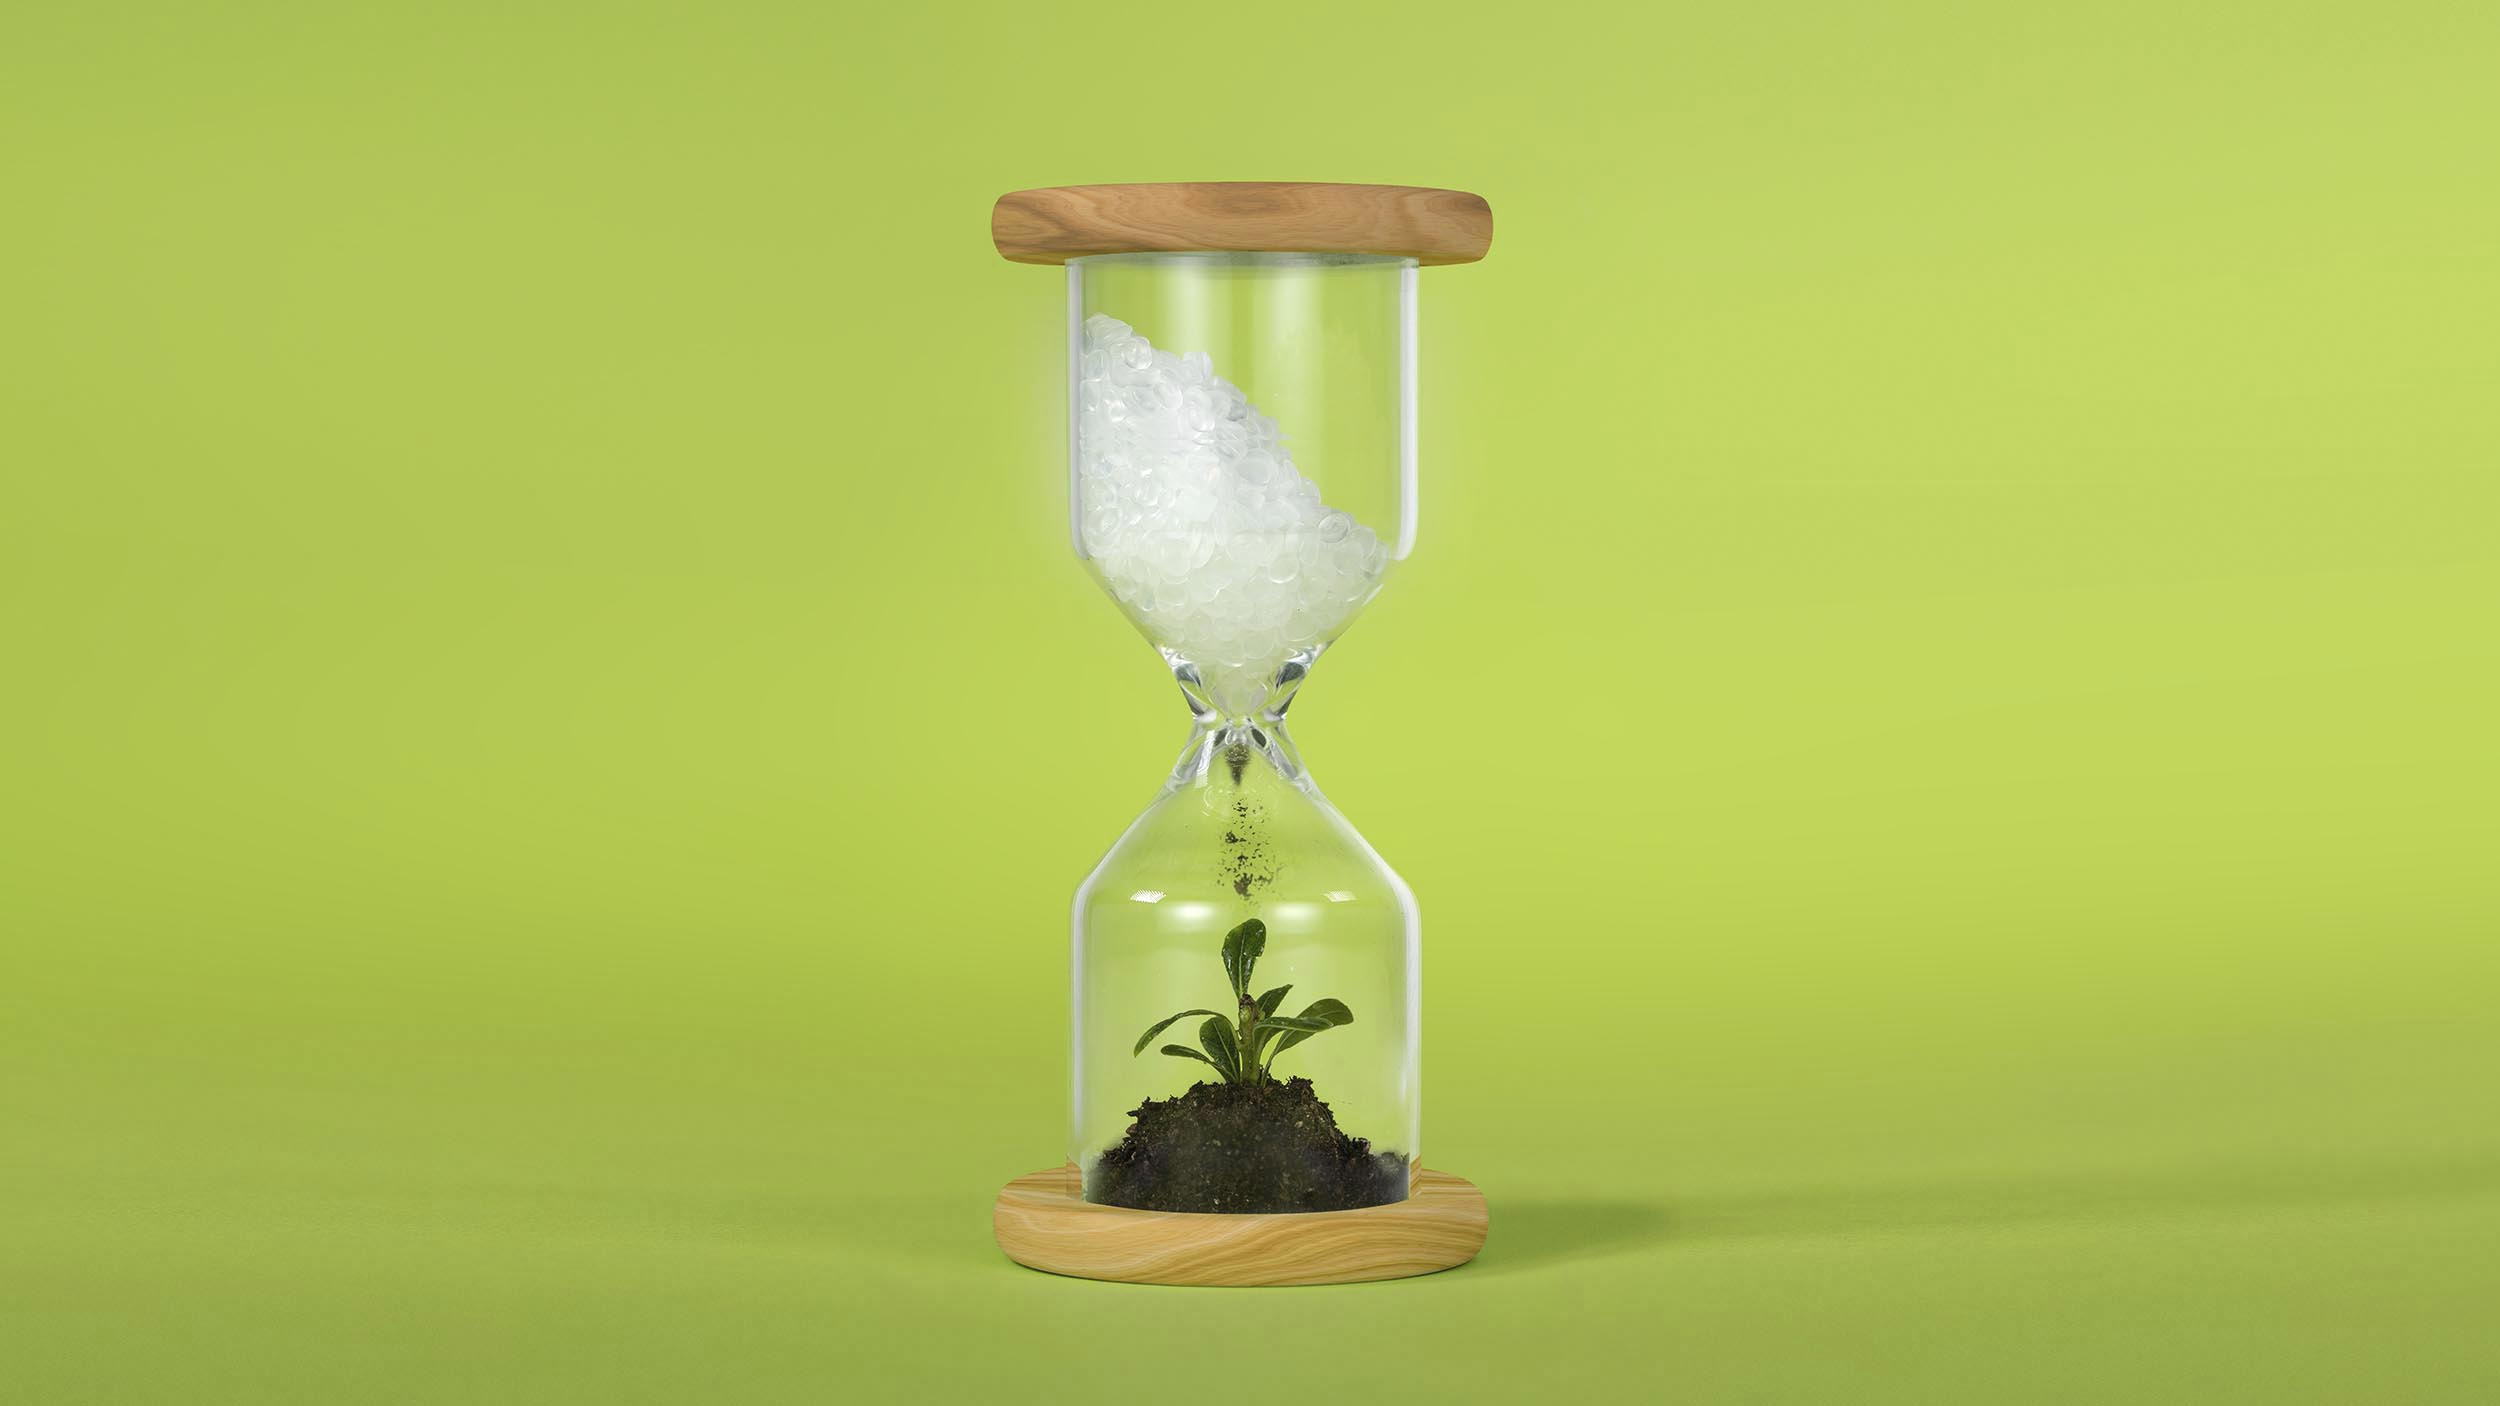 Illustration of hourglass, containing plastic transforming into compost